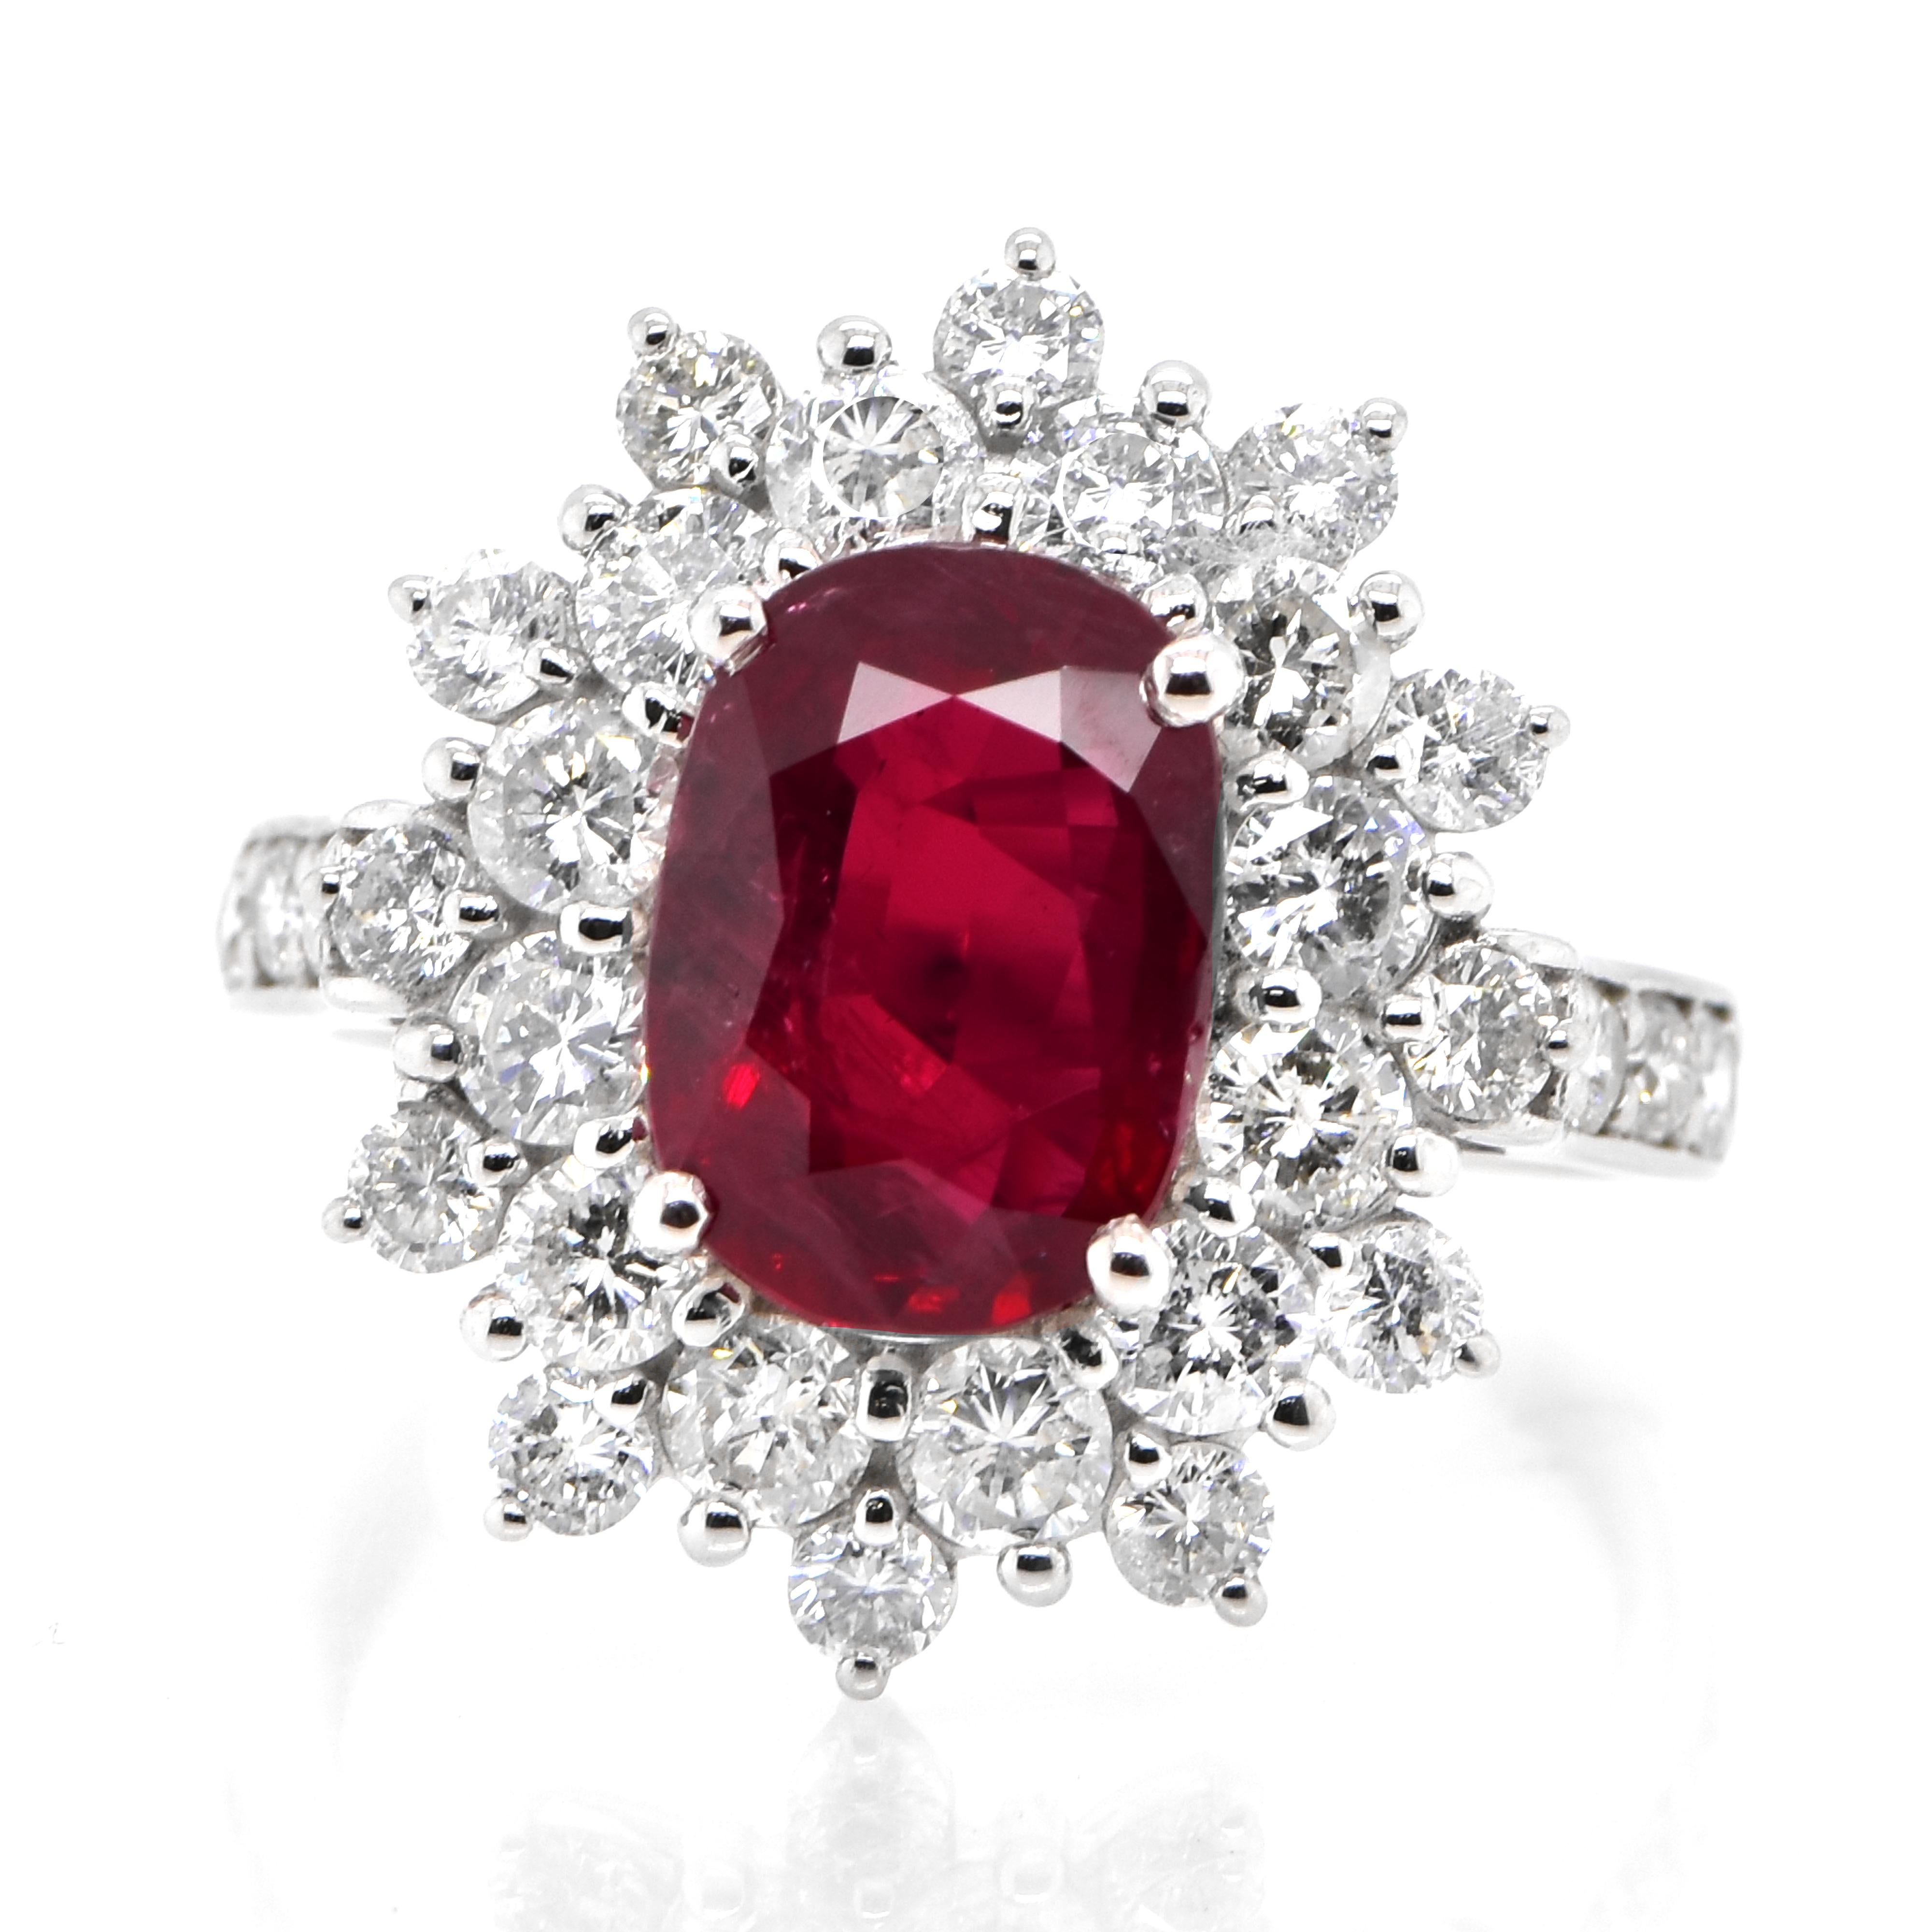 A beautiful Ring set in Platinum featuring a GIA Certified 2.97 Carat Natural Siam (Thailand) Ruby and 1.73 Carat Diamonds. Rubies are referred to as 